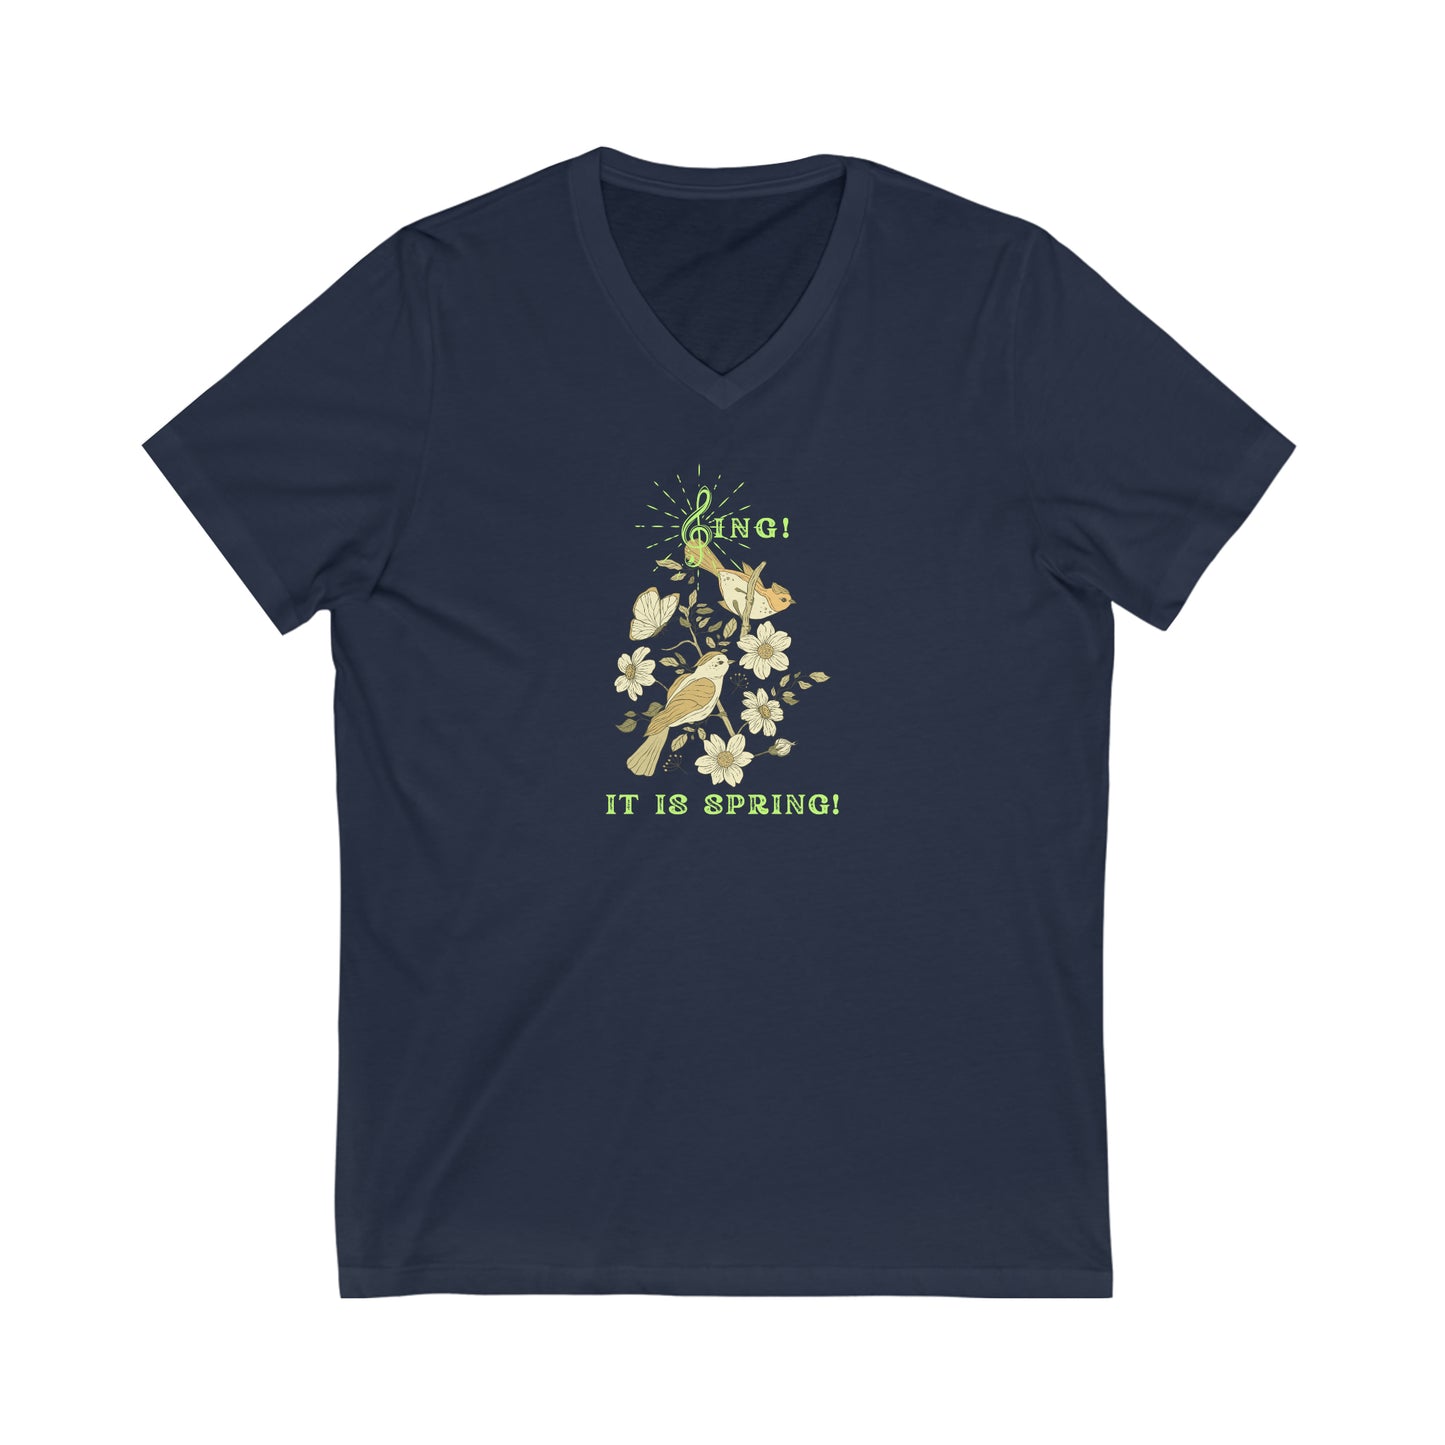 SING THIS IS SPRING UNISEX V  NECK  T SHIRT GIFT WITH GREEN FONT